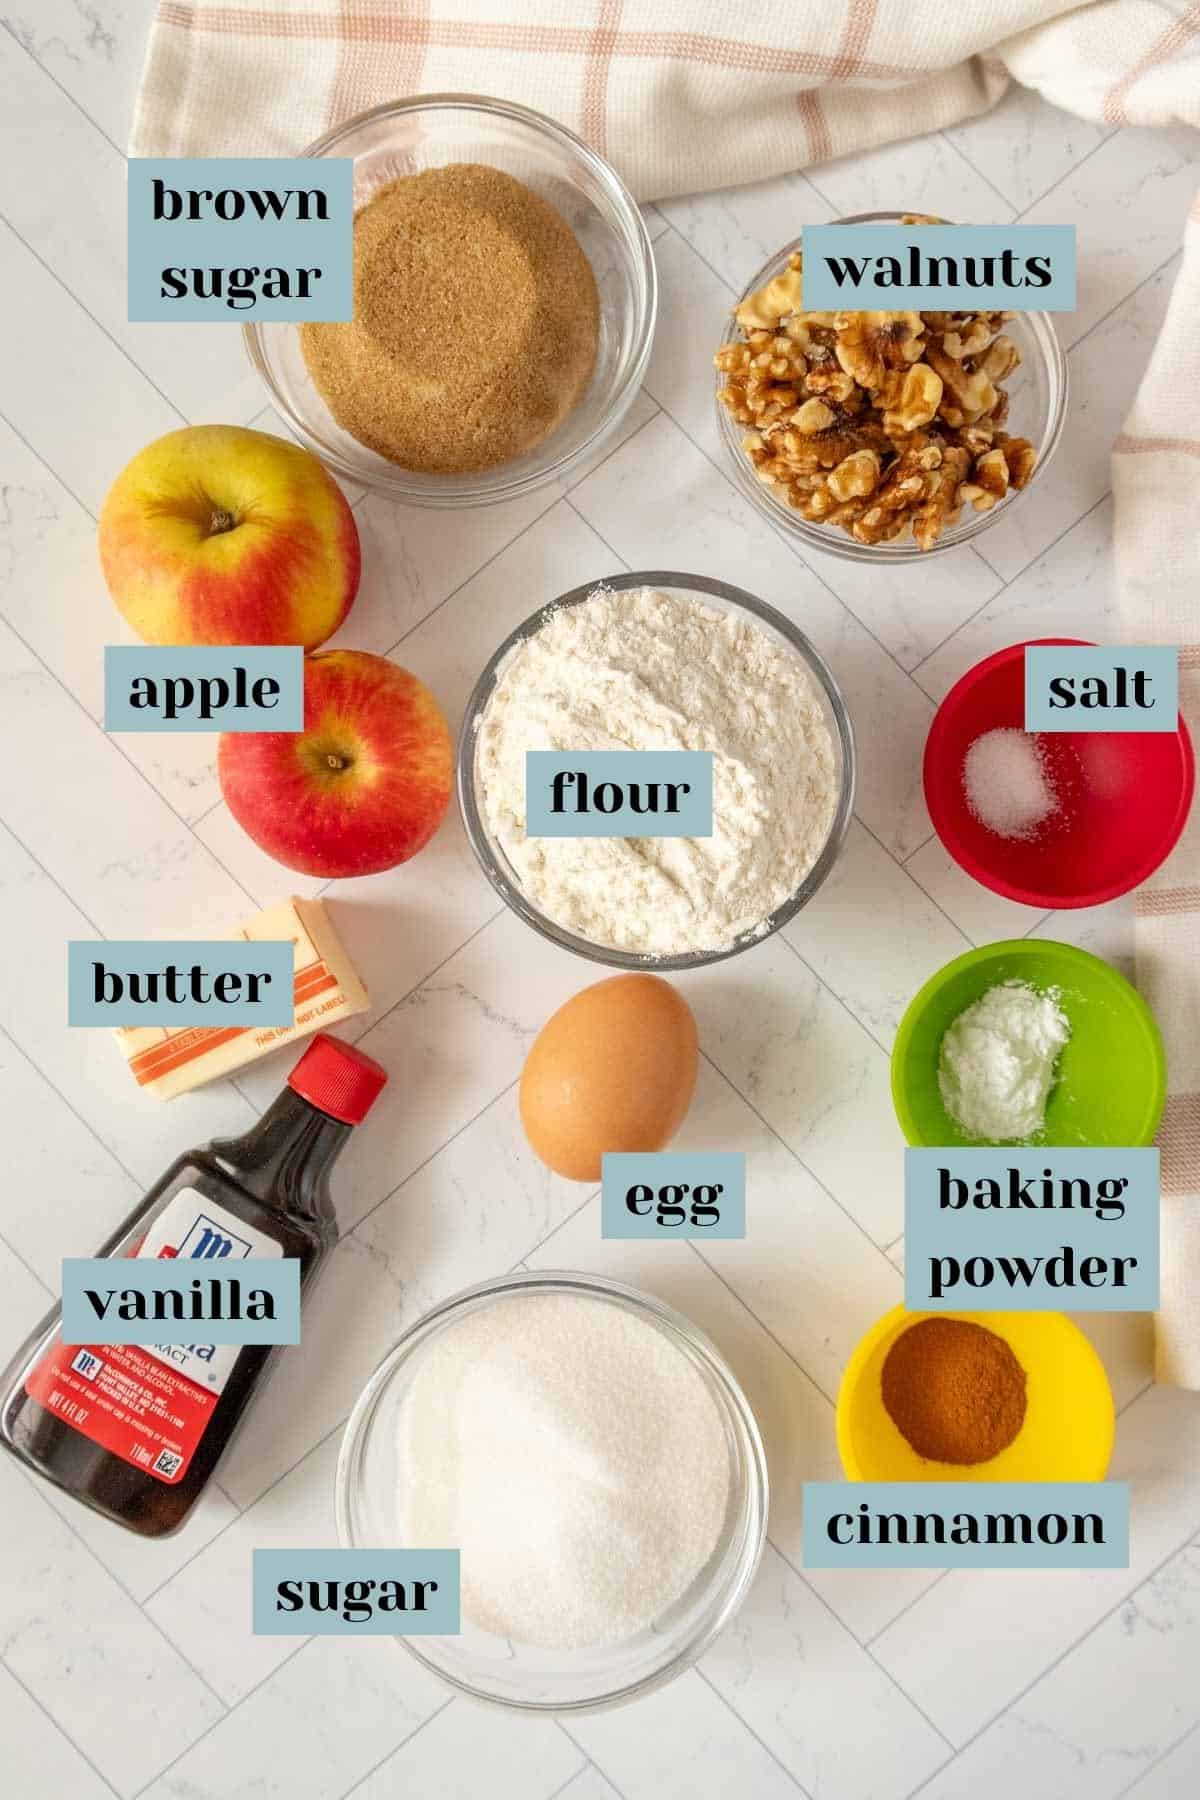 The ingredients for a homemade apple squares.